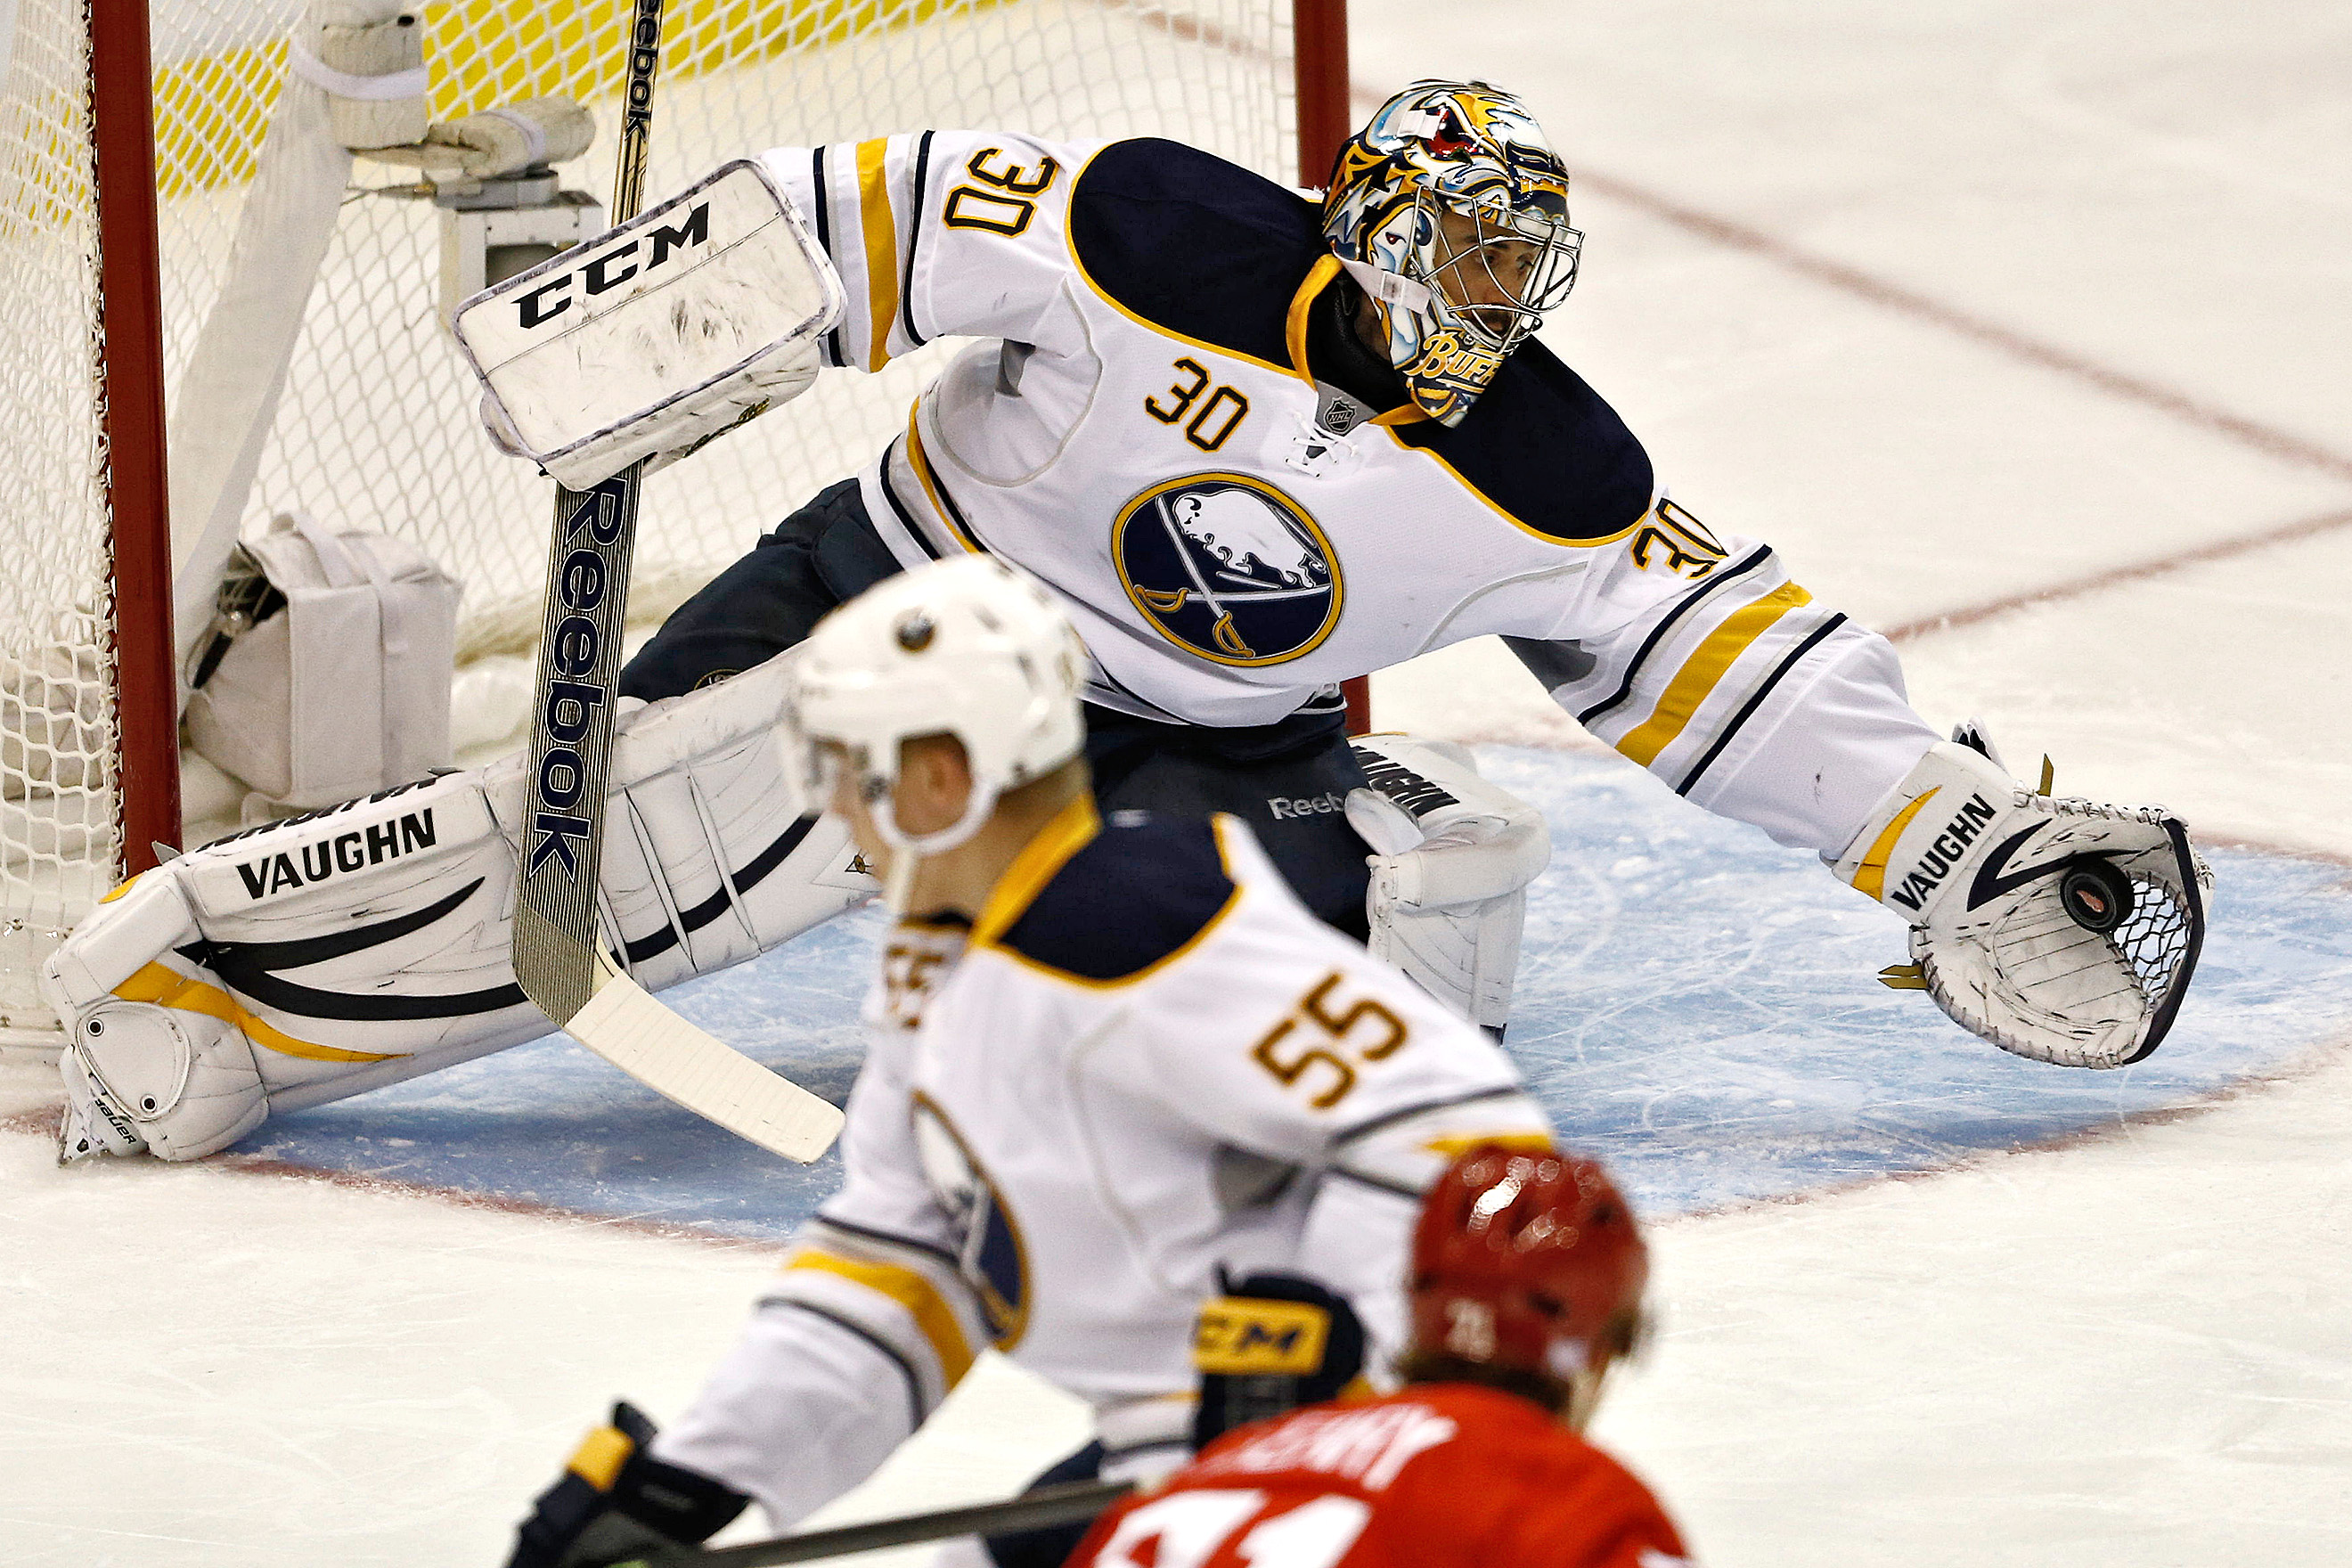 Ryan Miller is NHL's all-time wins leader by American-born goaltender